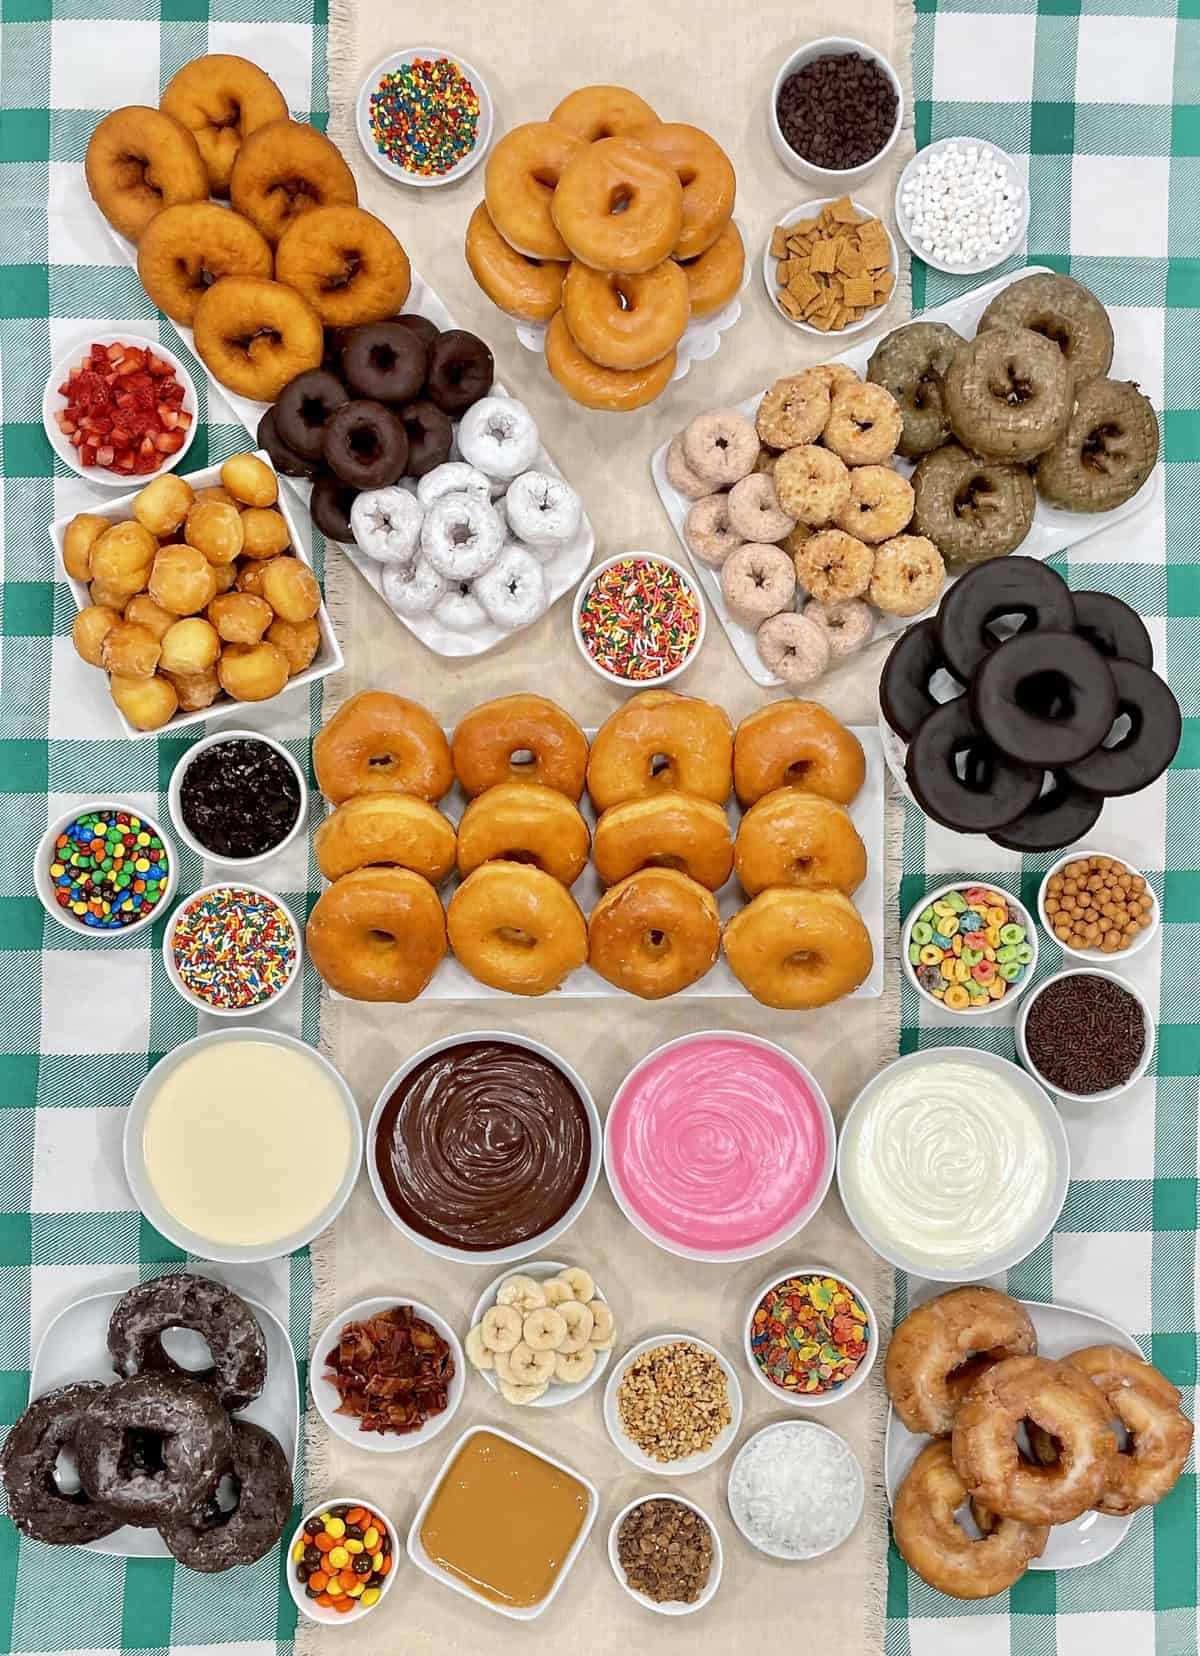 Decorate-Your-Own Donut Spread by The BakerMama